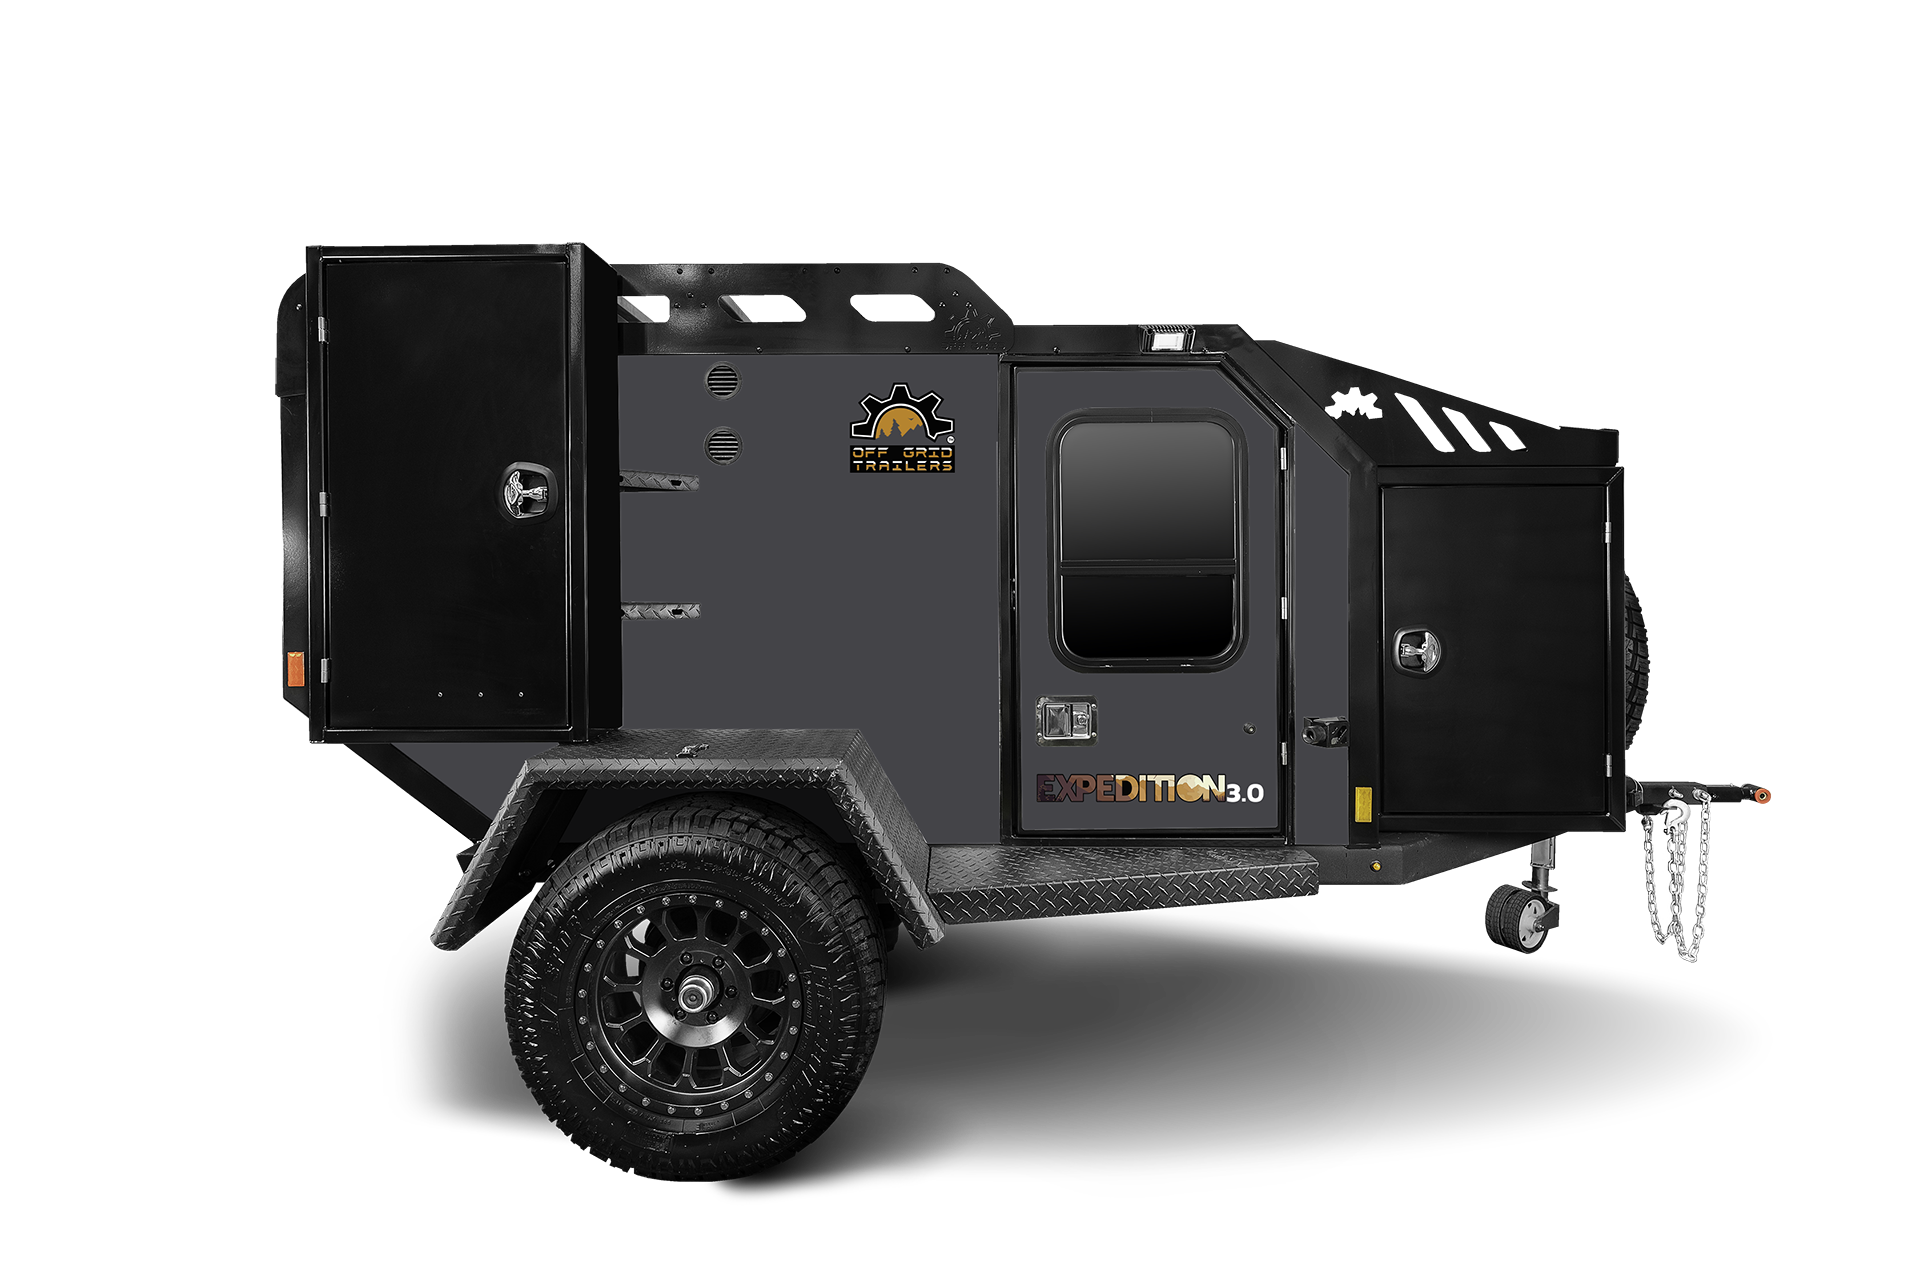 2024 EXPEDITION 3.0 OVERLAND TRAILER (#3008)